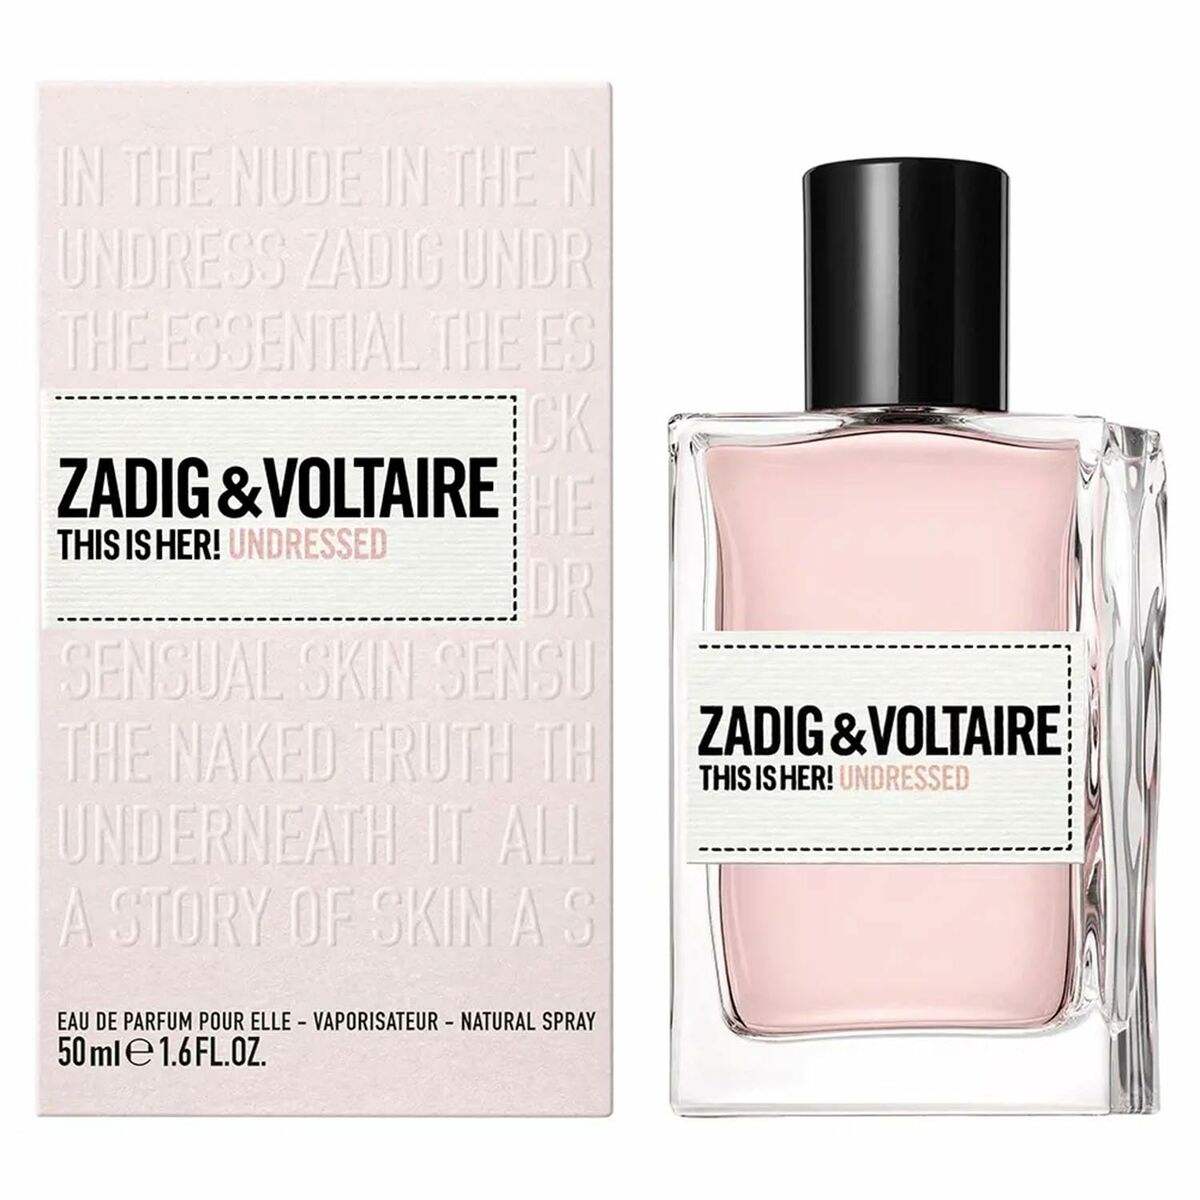 Perfume Mujer Zadig & Voltaire   EDP This is her! Undressed 50 ml